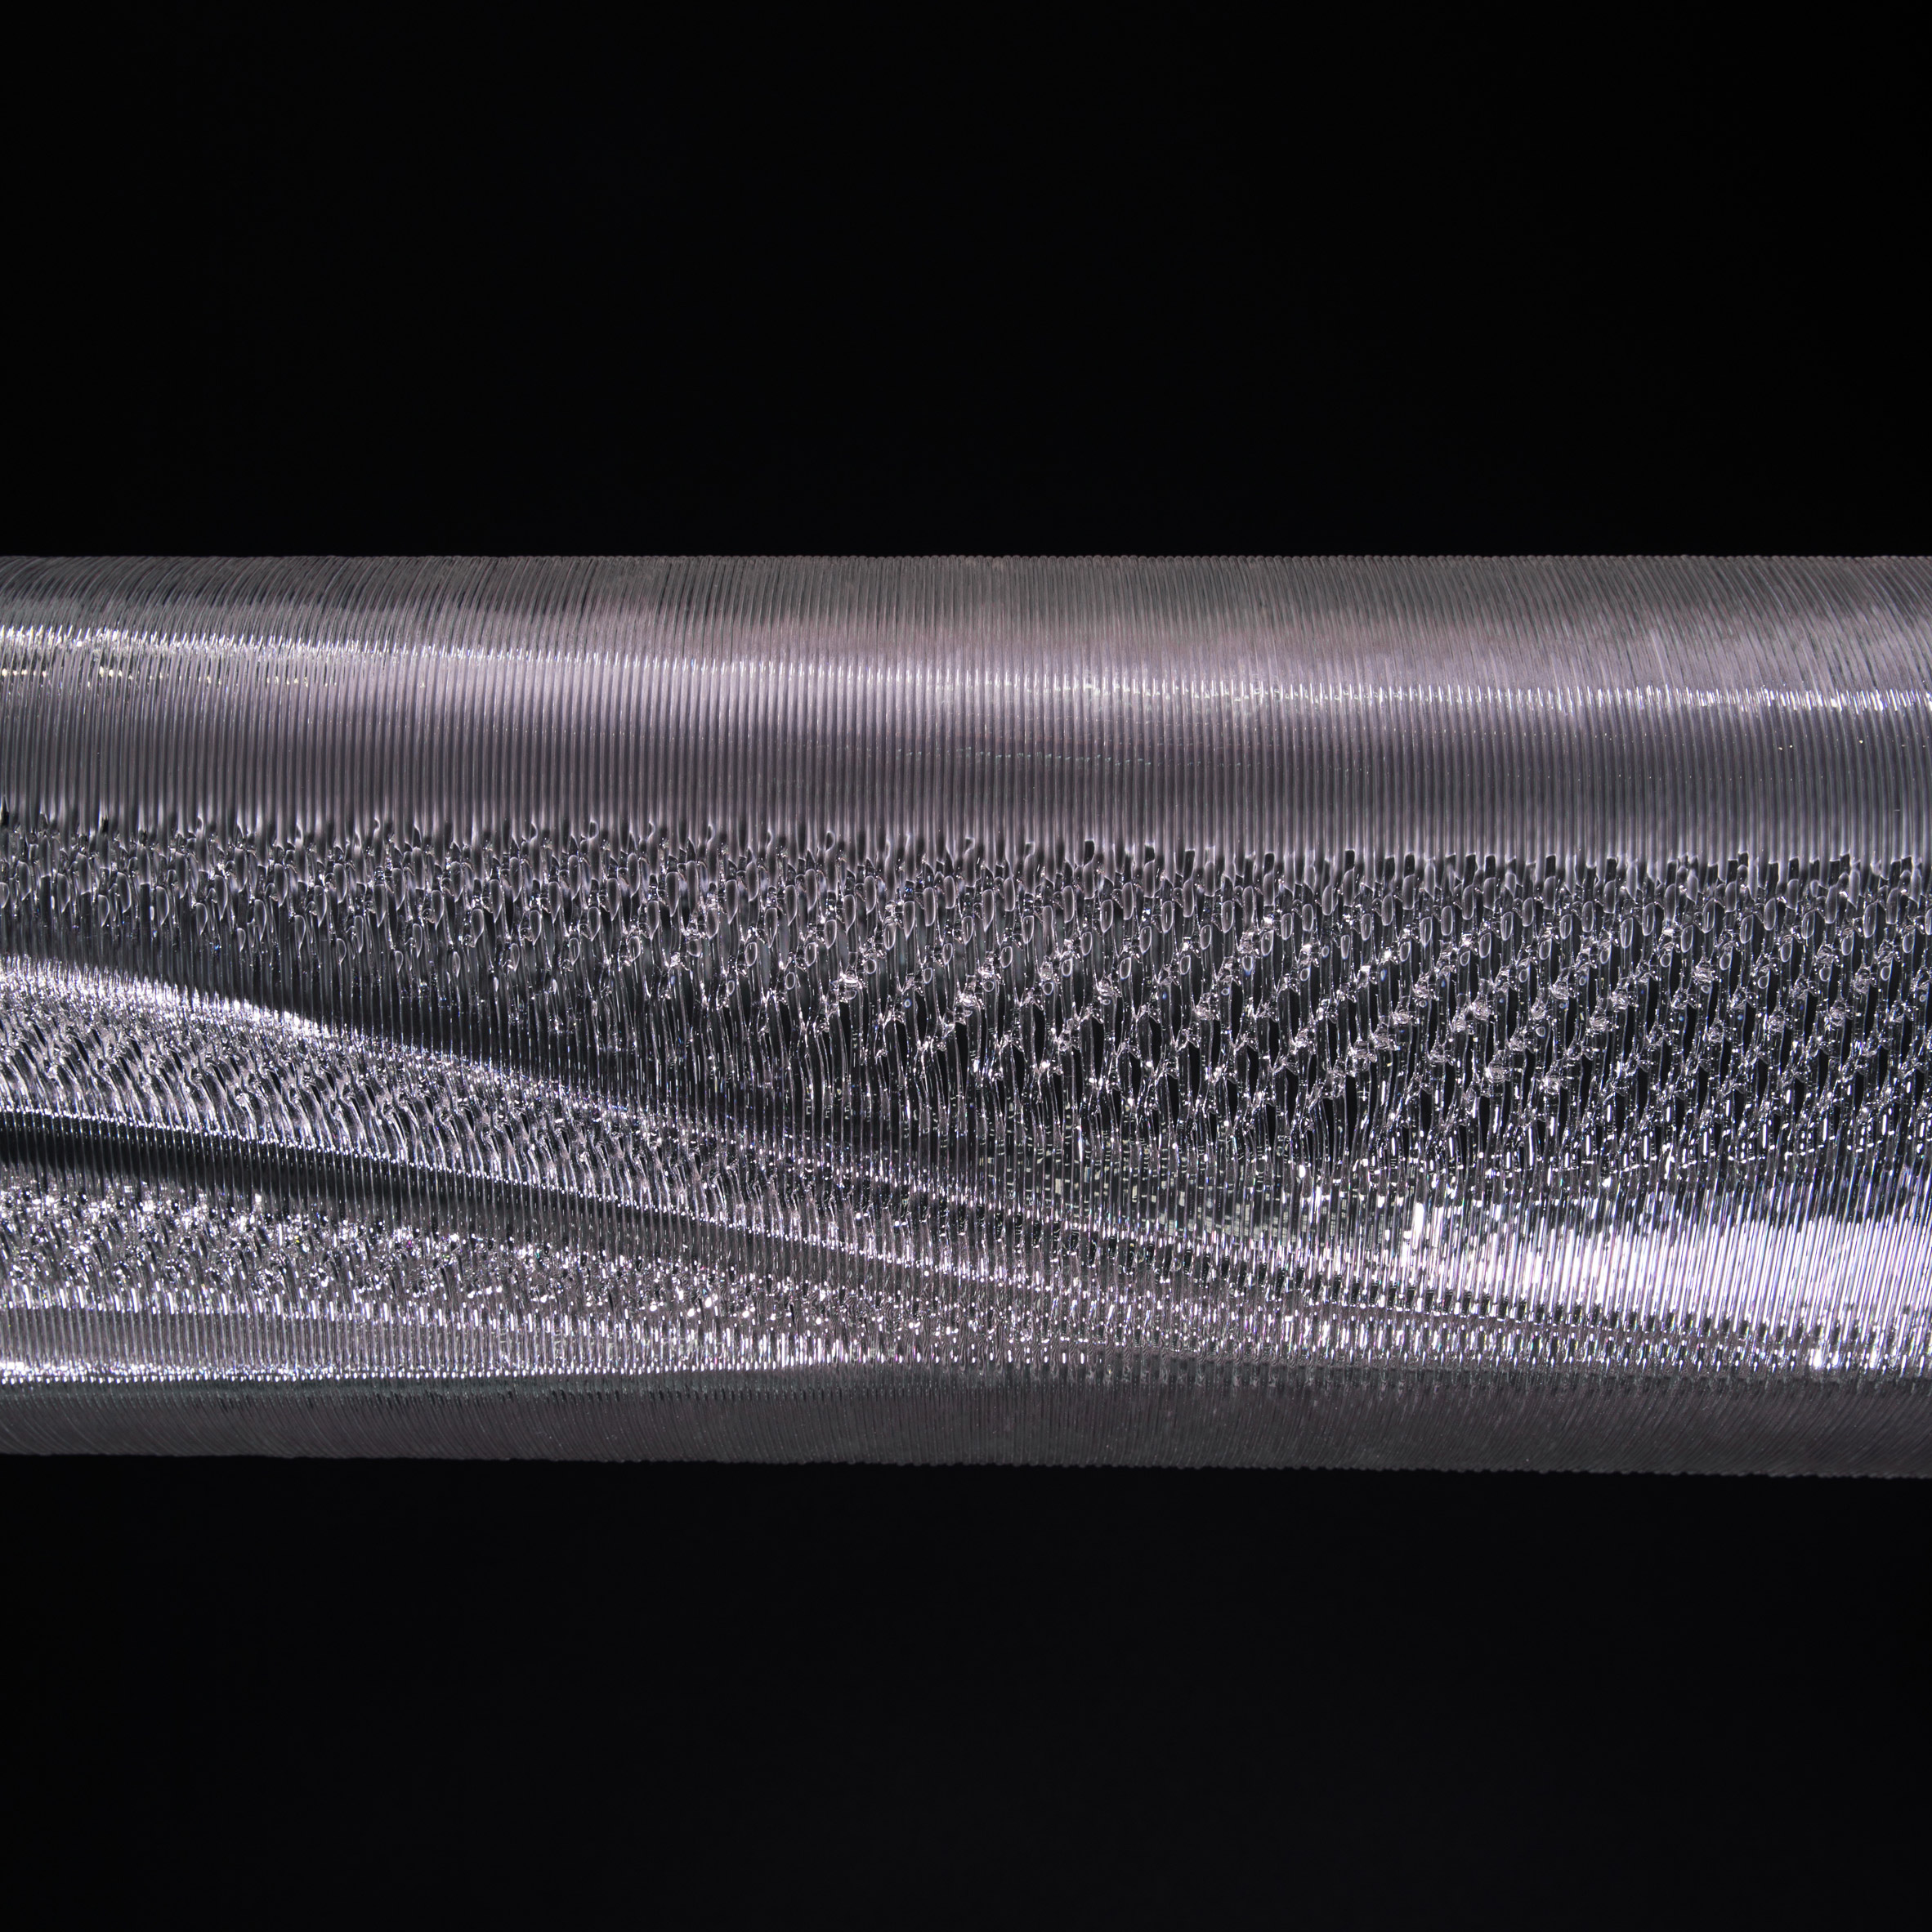 Close-up photo of the Systems Reef 2 tubing showing the texture of fine coils of plastic filament